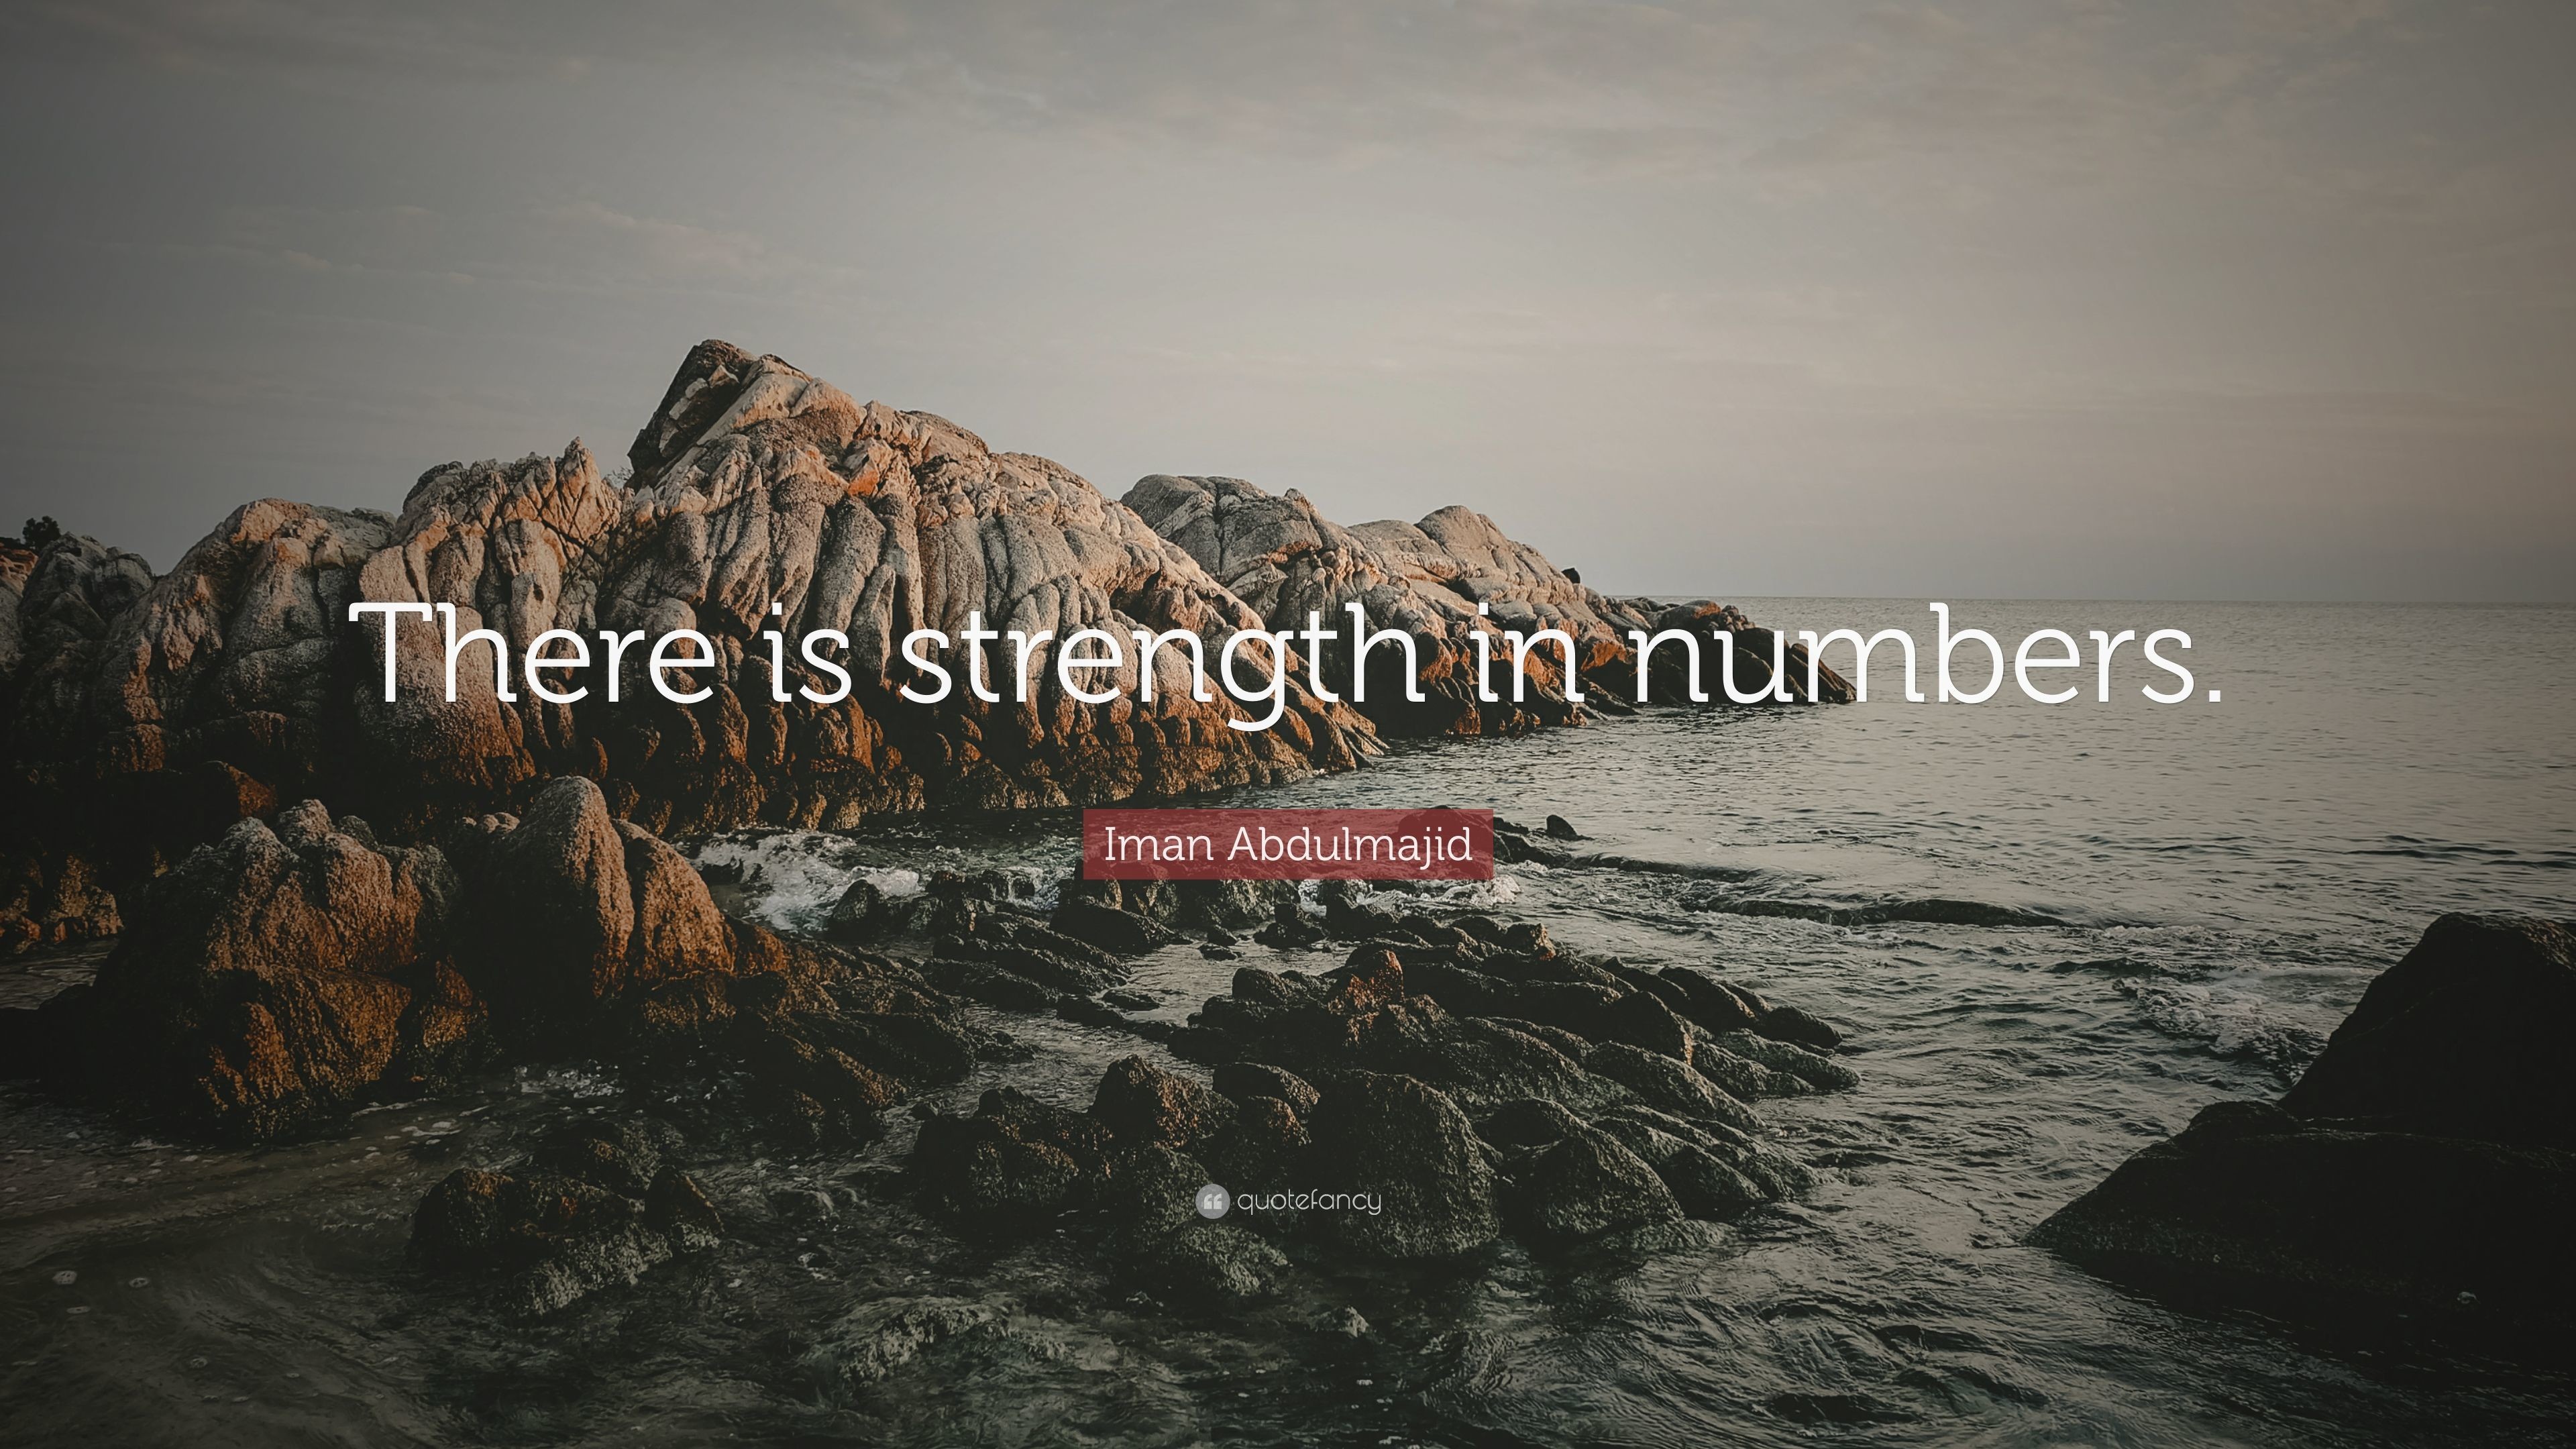 3840x2160 Iman Abdulmajid Quote: “There is strength in numbers.”